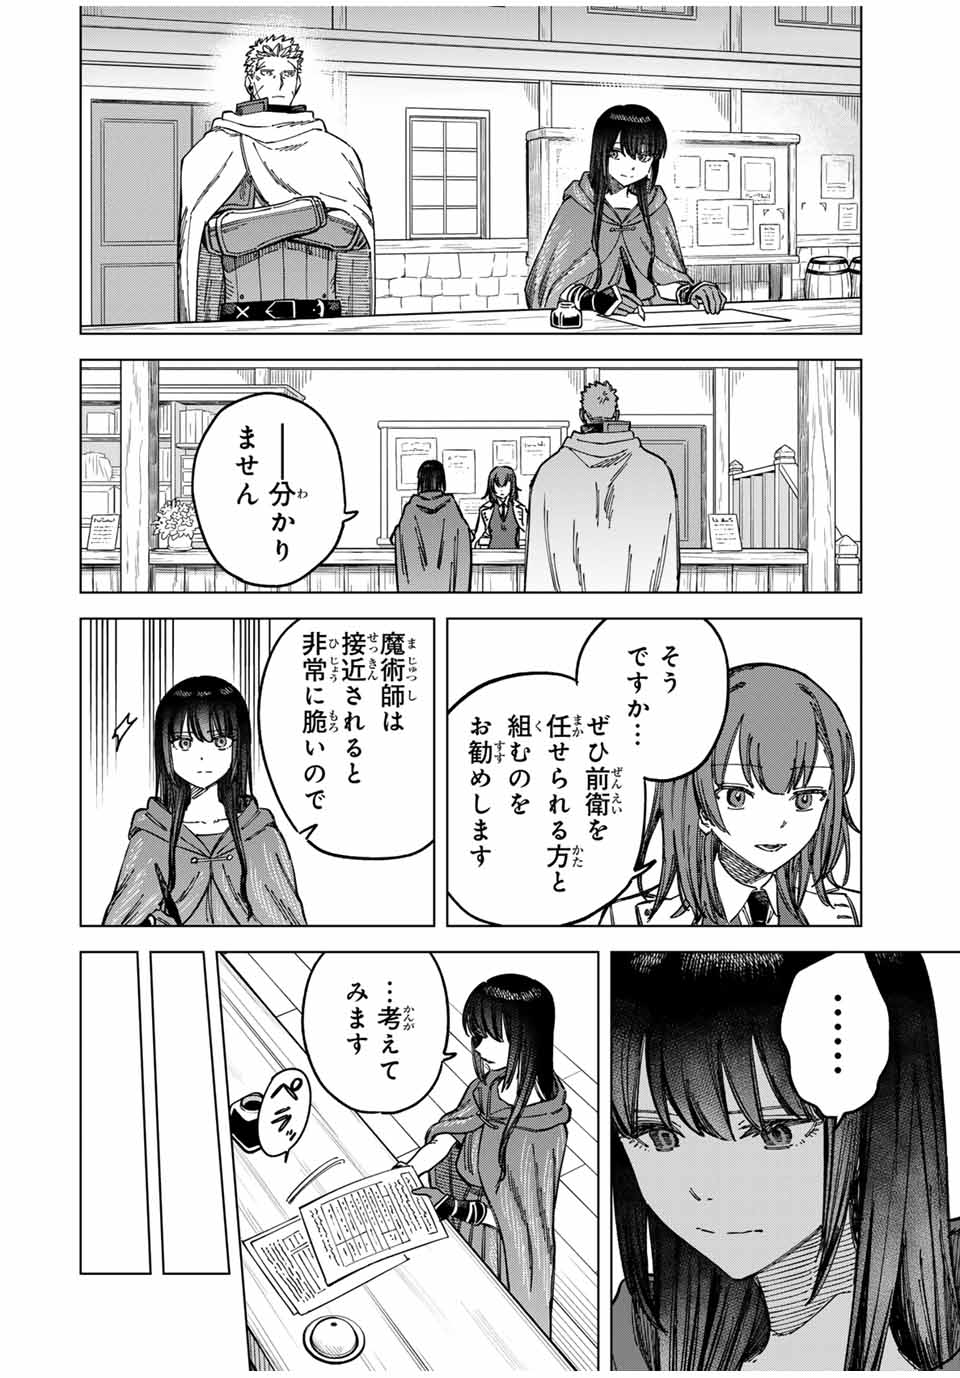 Witch and Mercenary 魔女と傭兵 第5.1話 - Page 8